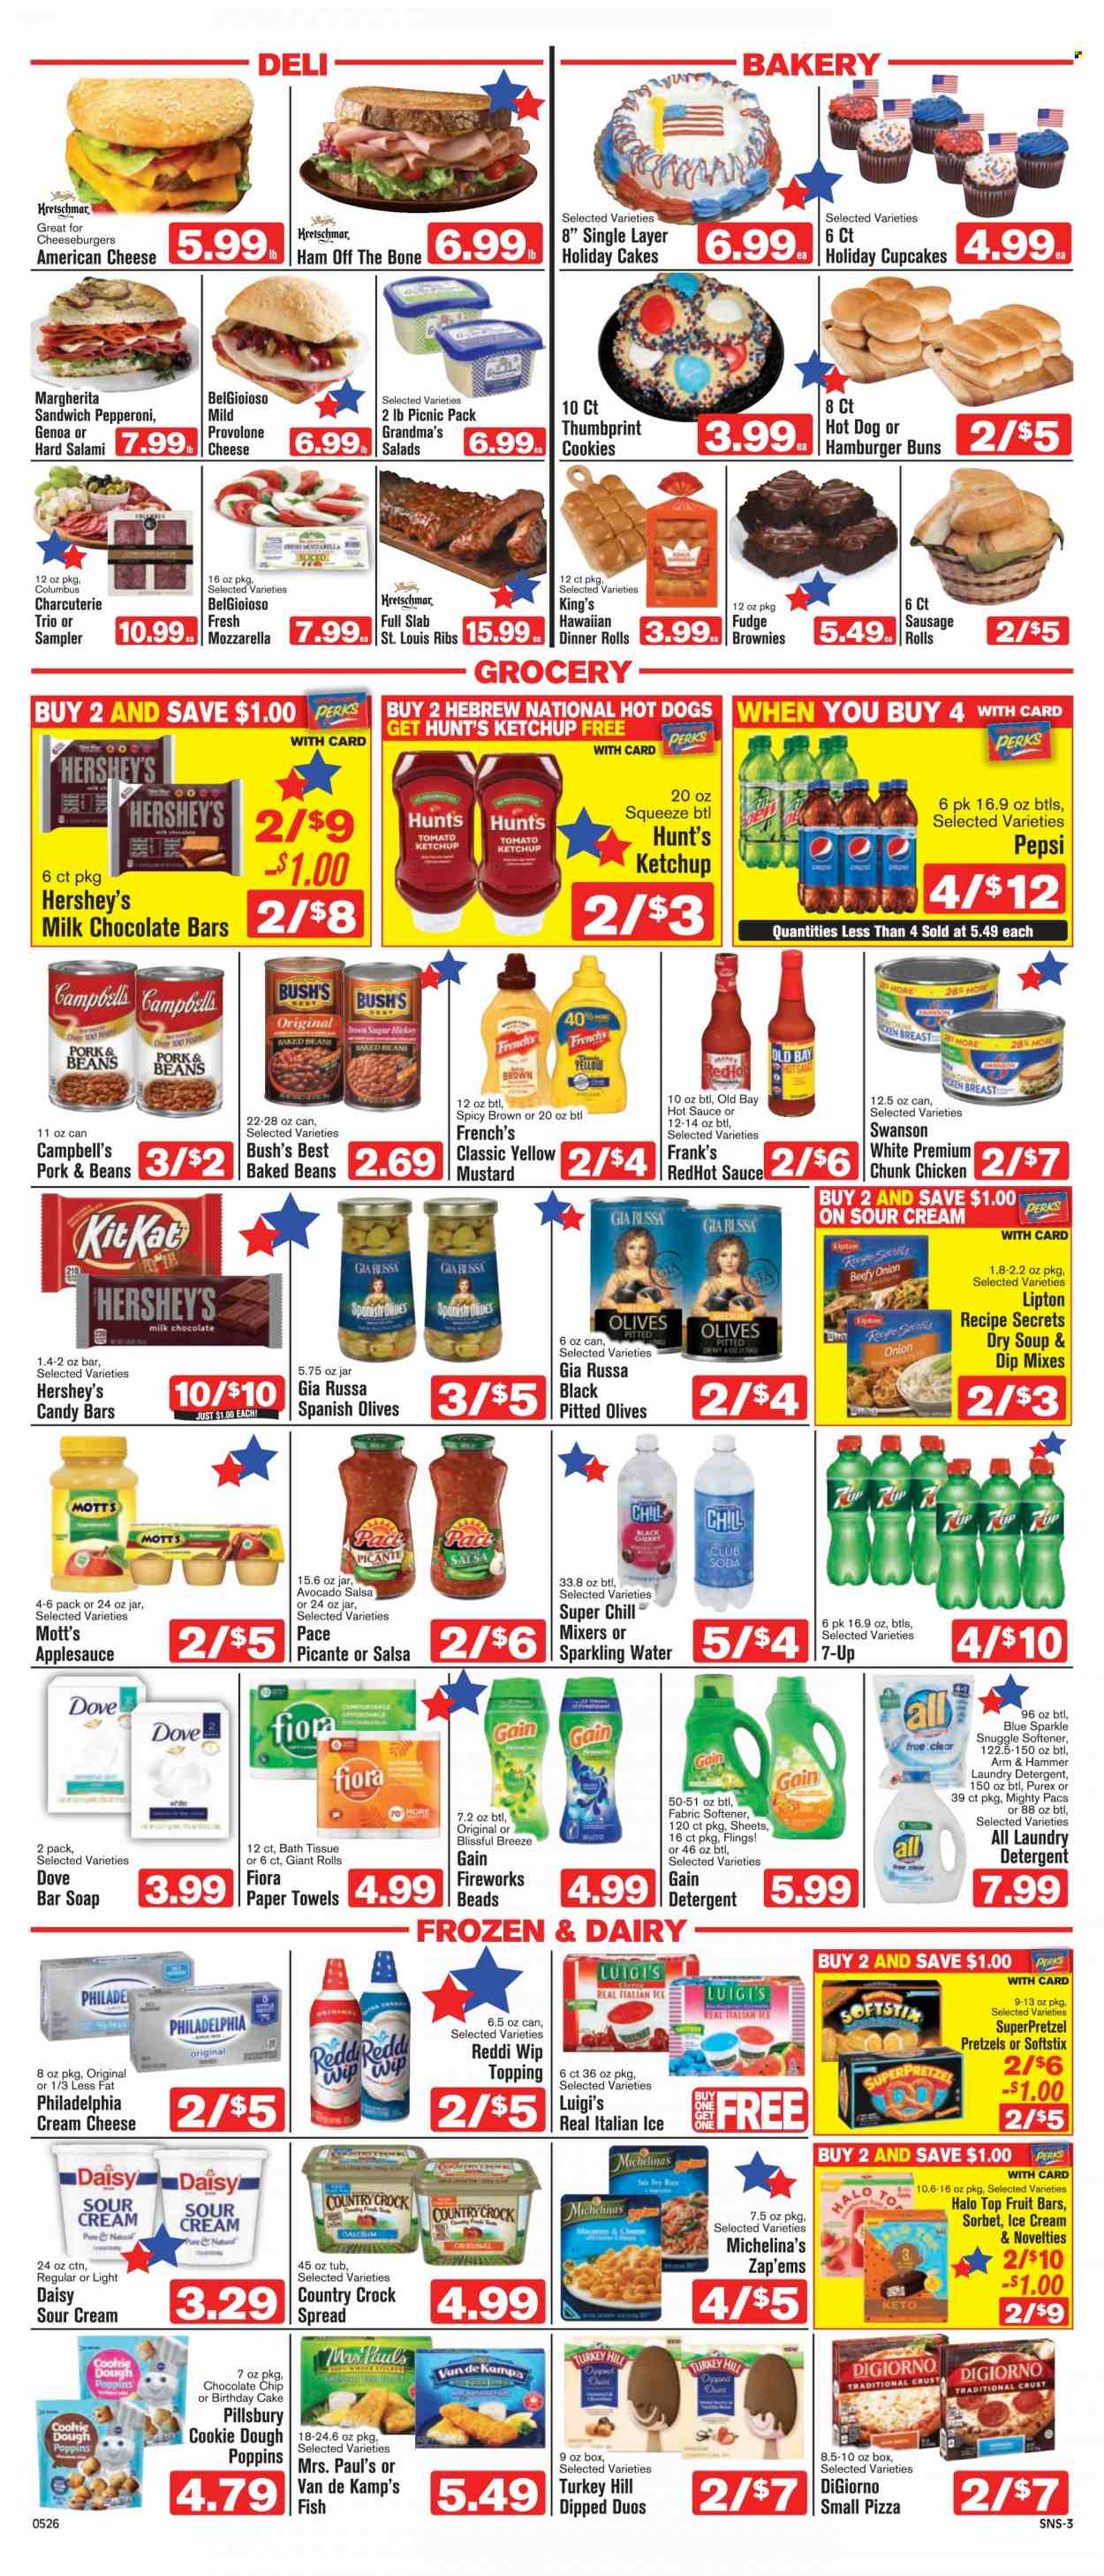 thumbnail - Shop ‘n Save Flyer - 05/26/2022 - 06/01/2022 - Sales products - pretzels, cake, dinner rolls, buns, burger buns, cupcake, brownies, beans, cherries, Mott's, fish, Van de Kamp's, Campbell's, hot dog, pizza, sandwich, soup, Pillsbury, salami, ham, ham off the bone, sausage, pepperoni, american cheese, cream cheese, Philadelphia, Provolone, sour cream, ice cream, Hershey's, SuperPretzel, cookie dough, cookies, milk chocolate, KitKat, chocolate bar, ARM & HAMMER, cane sugar, topping, olives, baked beans, rice, mustard, hot sauce, ketchup, salsa, apple sauce, Pepsi, Lipton, 7UP, Club Soda, sparkling water, bath tissue, kitchen towels, paper towels, detergent, Gain, Snuggle, fabric softener, laundry detergent, Gain Fireworks, Purex, Dove, soap bar, soap, calcium. Page 3.